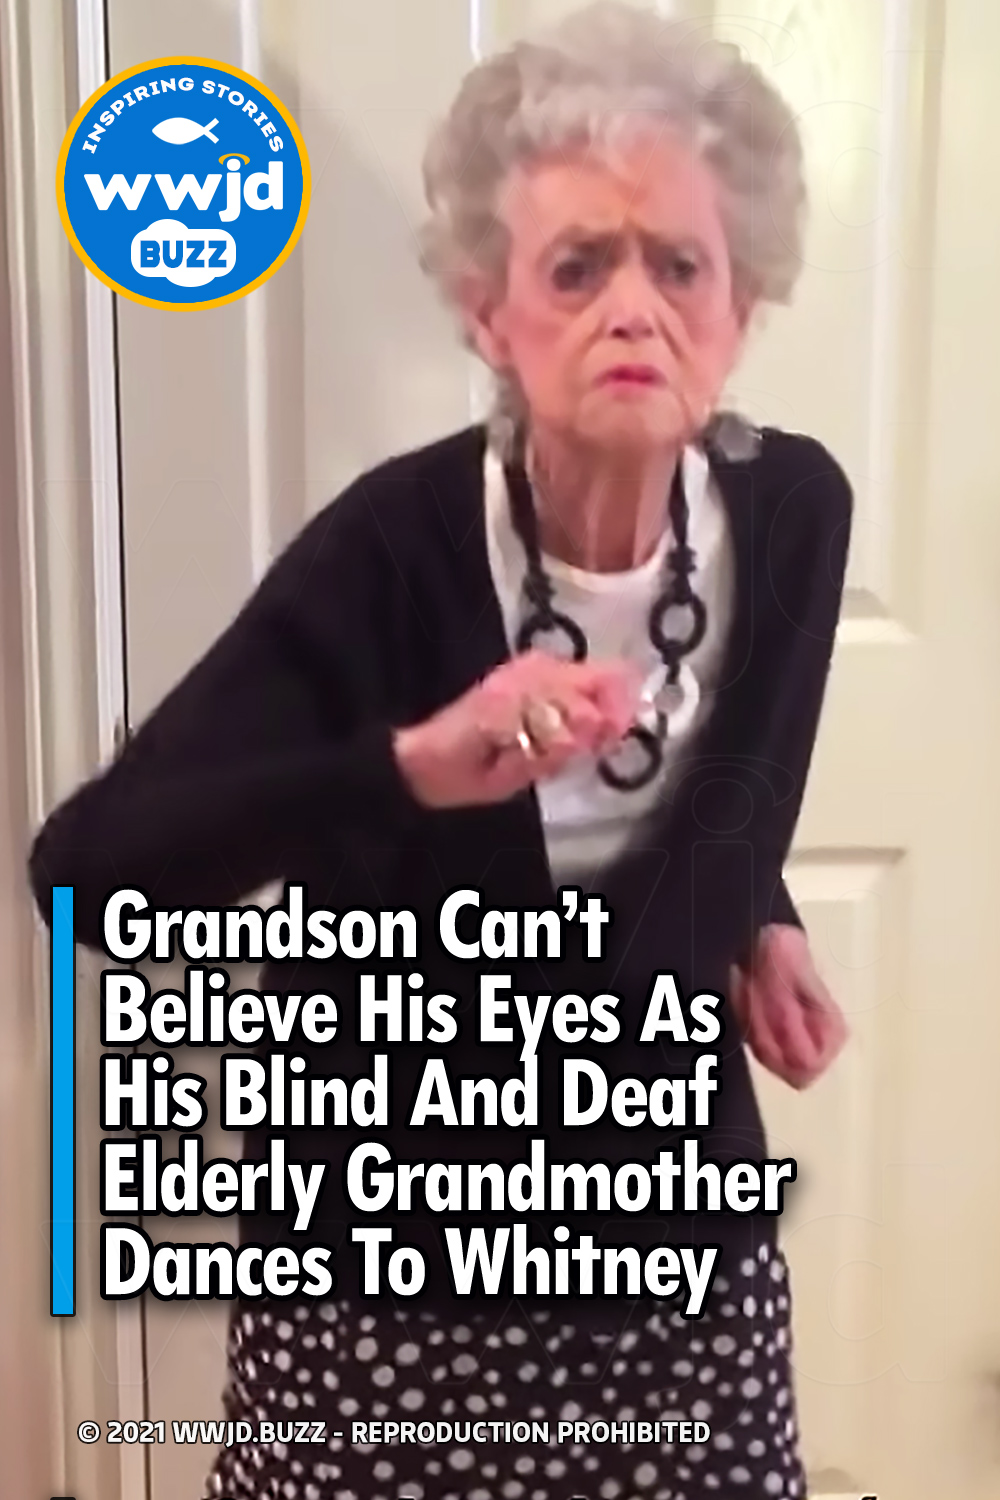 Grandson Can’t Believe His Eyes As His Blind And Deaf Elderly Grandmother Dances To Whitney